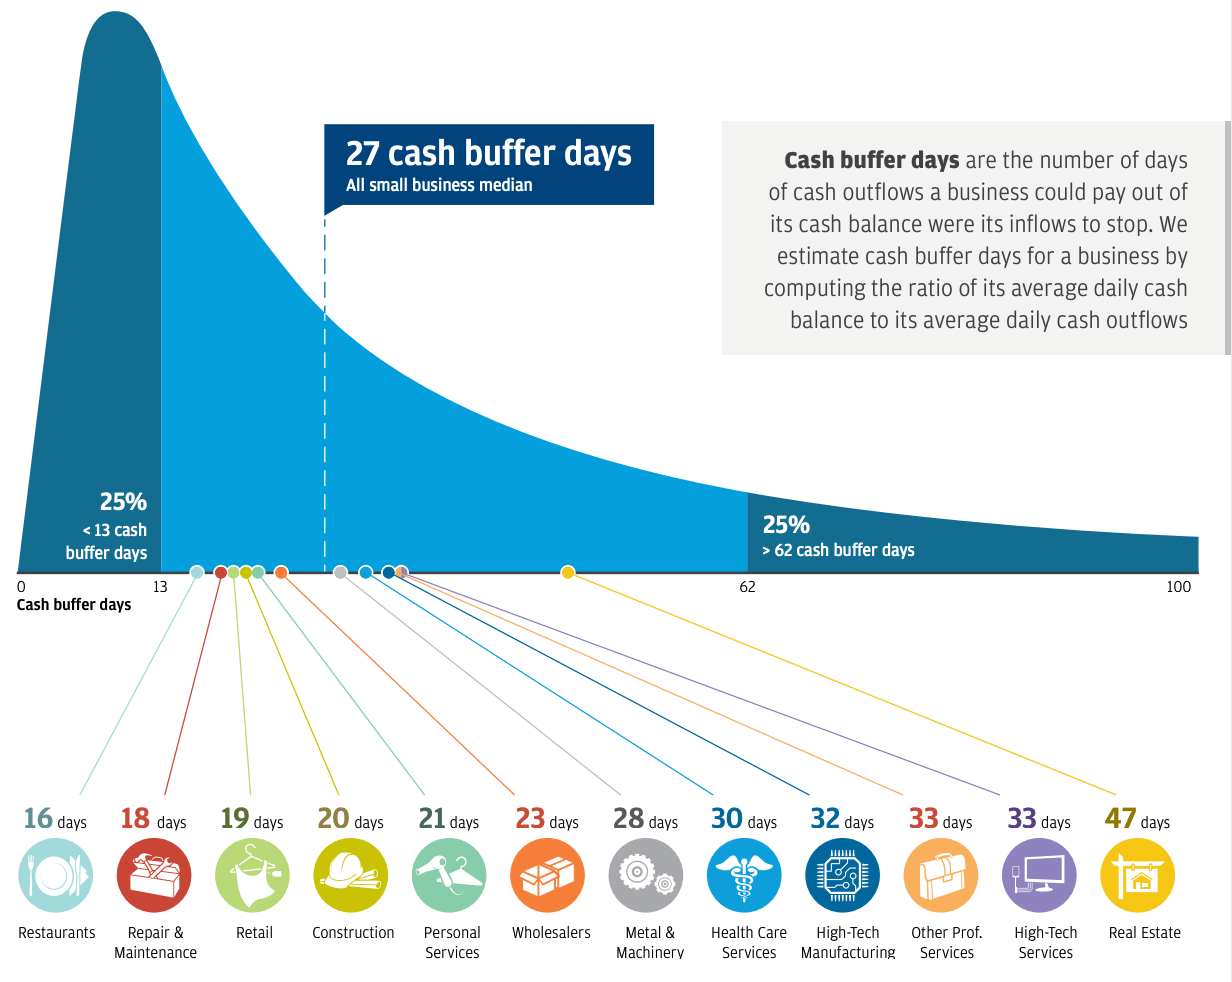 Graph showing the average cash buffer days by industry.